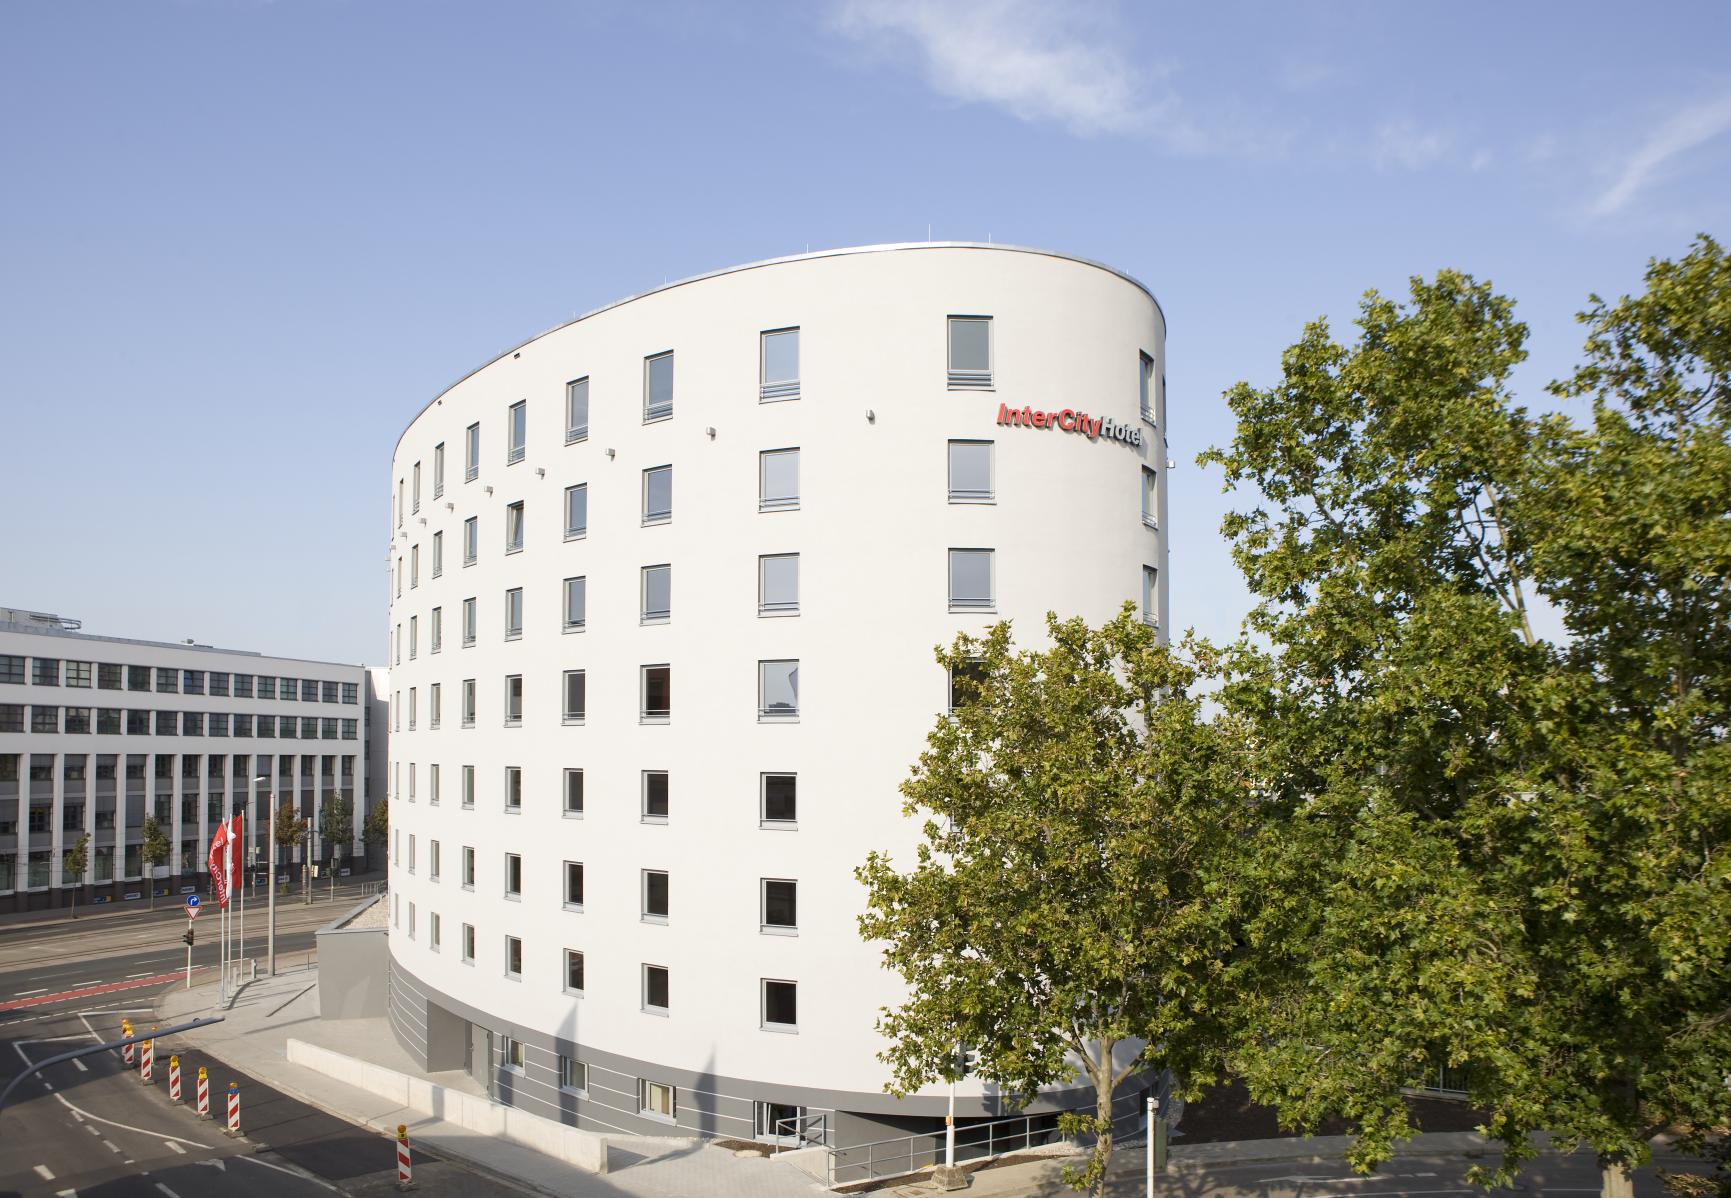 InterCityHotel Mainz <br/>77.35 ew <br/> <a href='http://vakantieoplossing.nl/outpage/?id=1cccd7689d4f8681b3181c8e2c1ef185' target='_blank'>View Details</a>